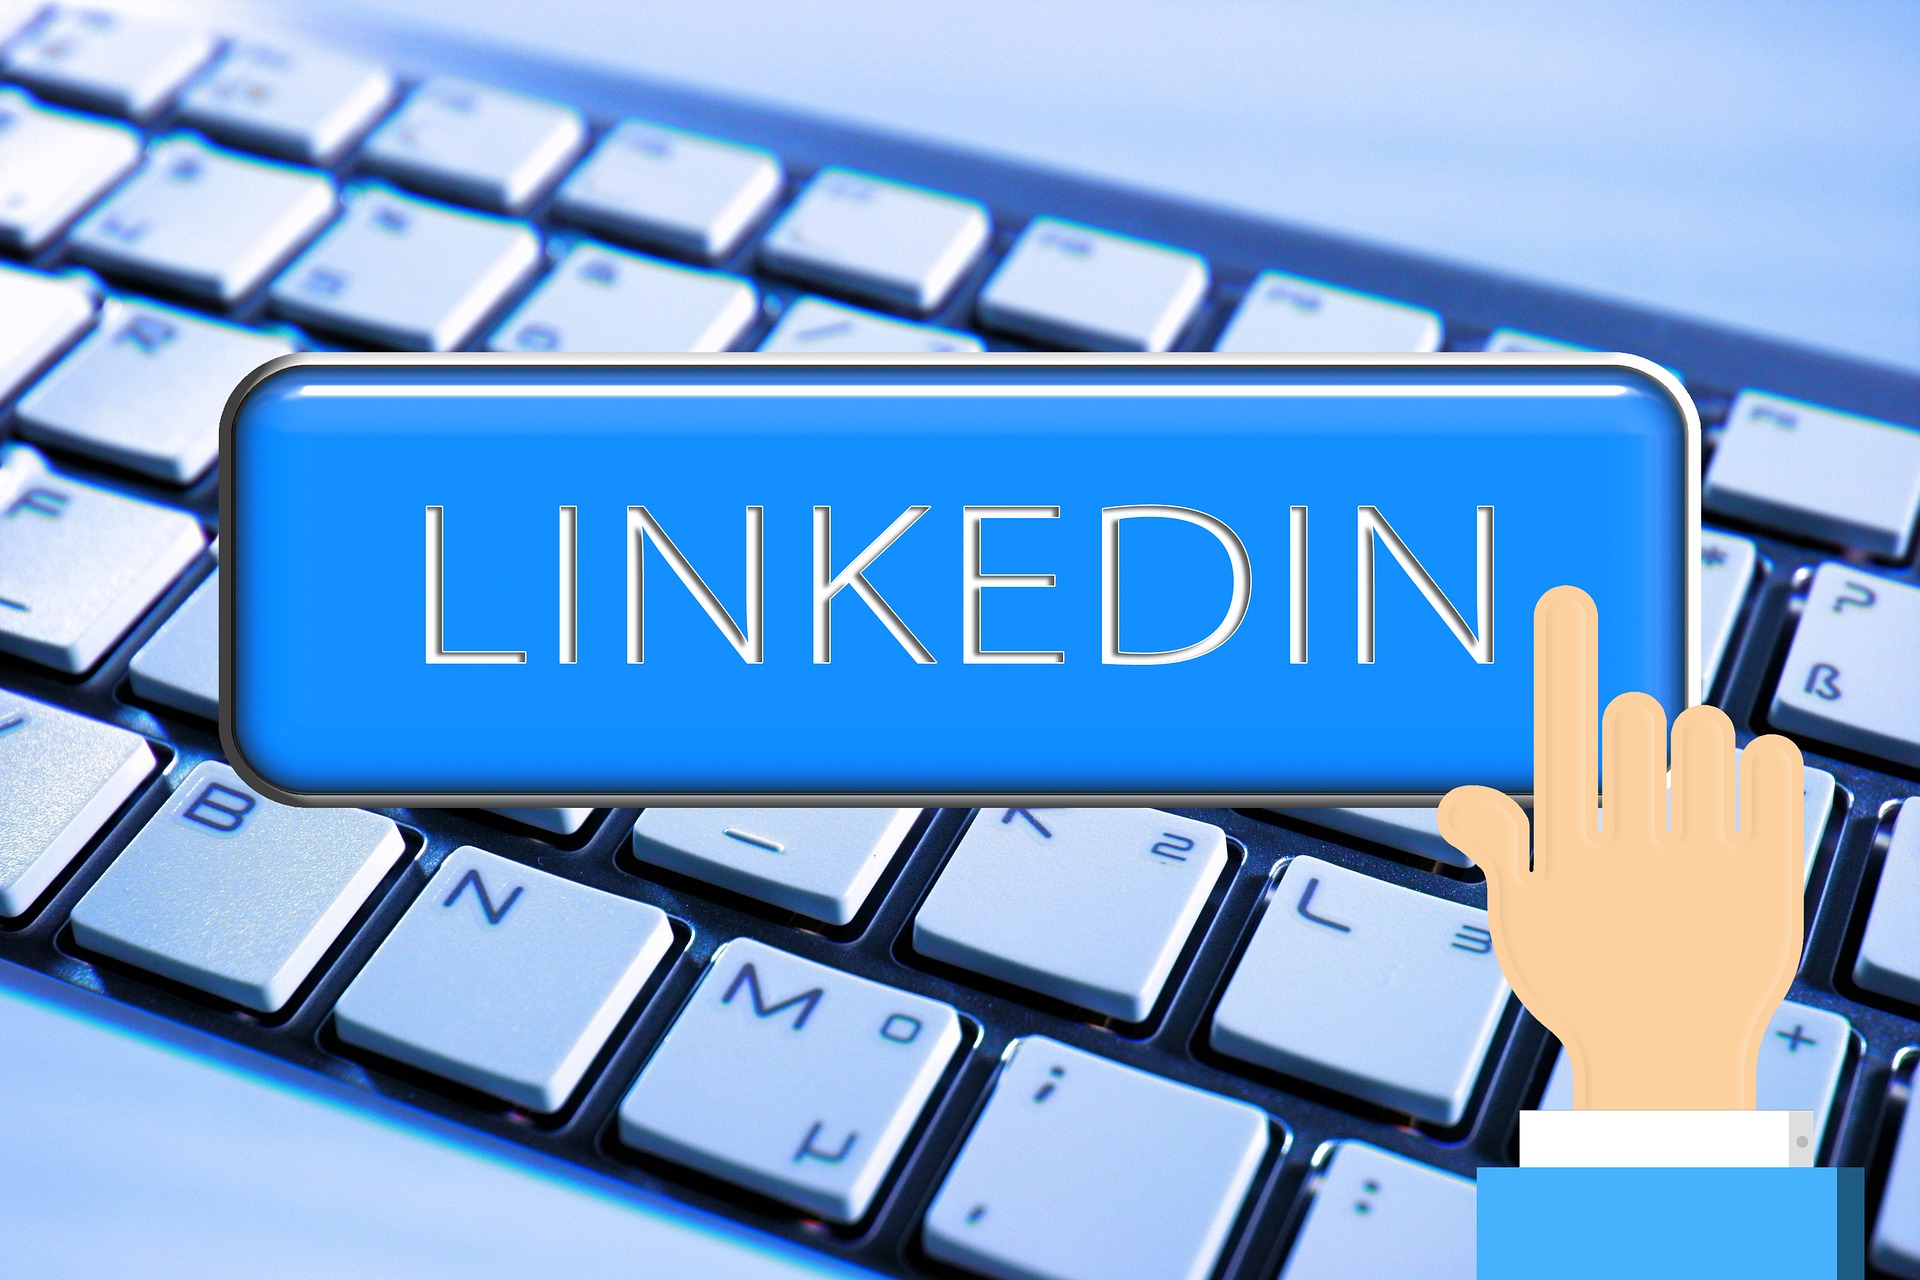 7 tips to make your LinkedIn Profile awesome: A Beginner’s Guide